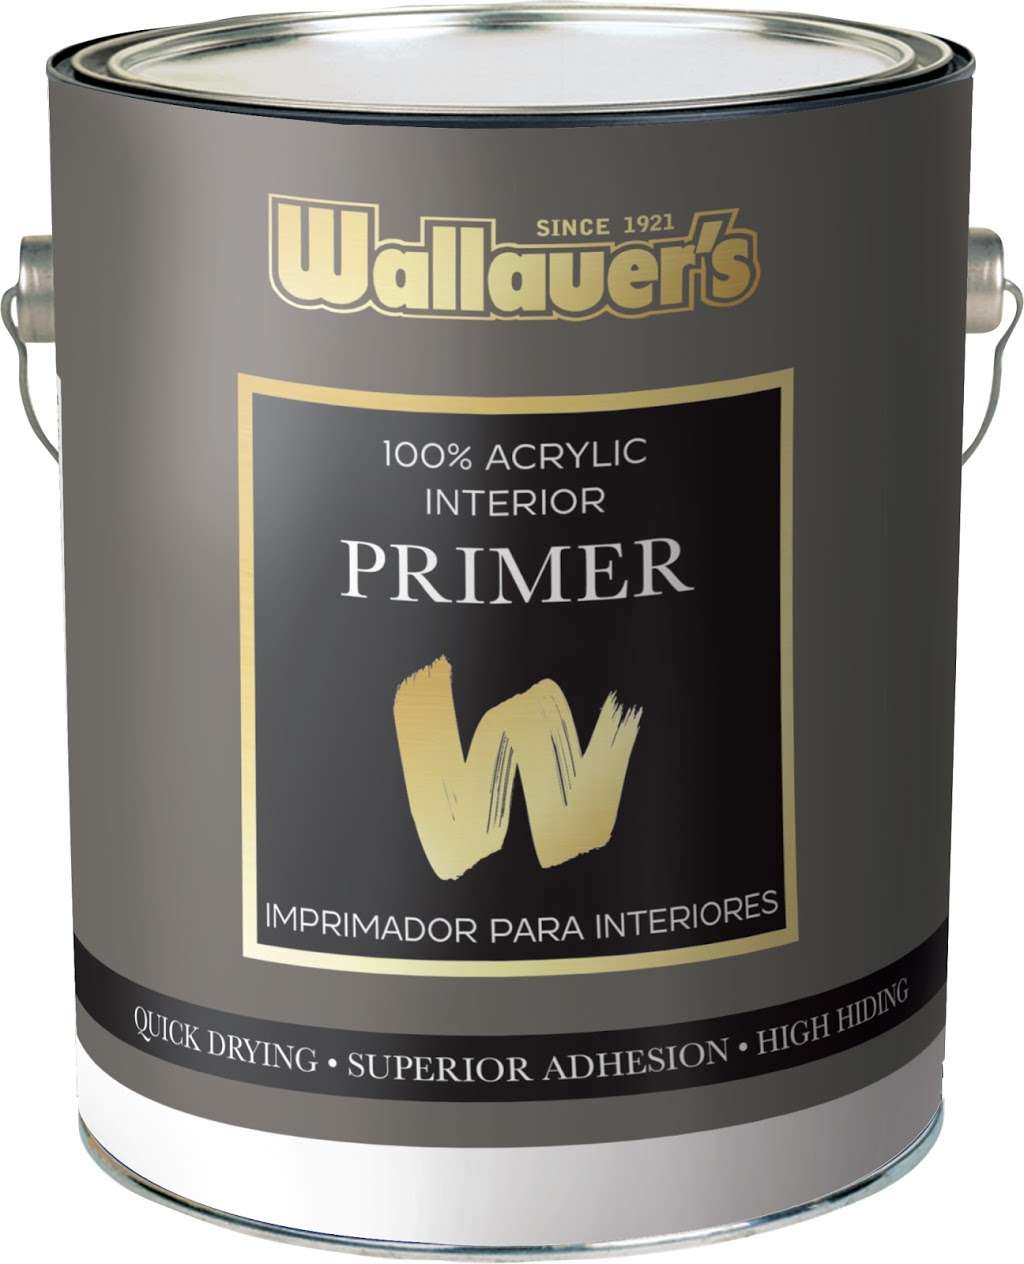 Wallauer Paint and Design | 621 Tuckahoe Rd, Yonkers, NY 10710, USA | Phone: (914) 779-6767